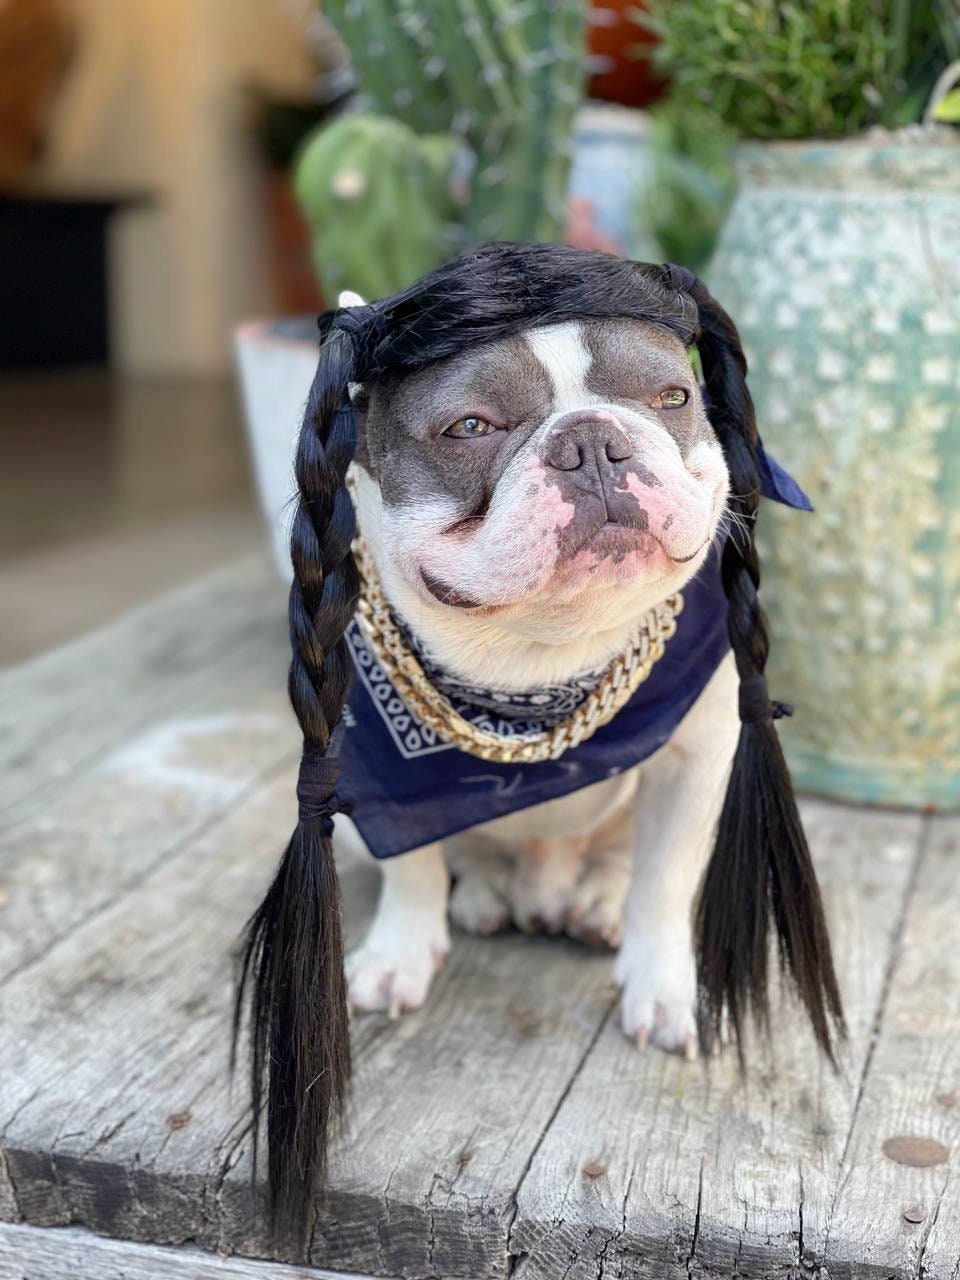 Cute Pet Braided Wig Black Color for Large Dog 